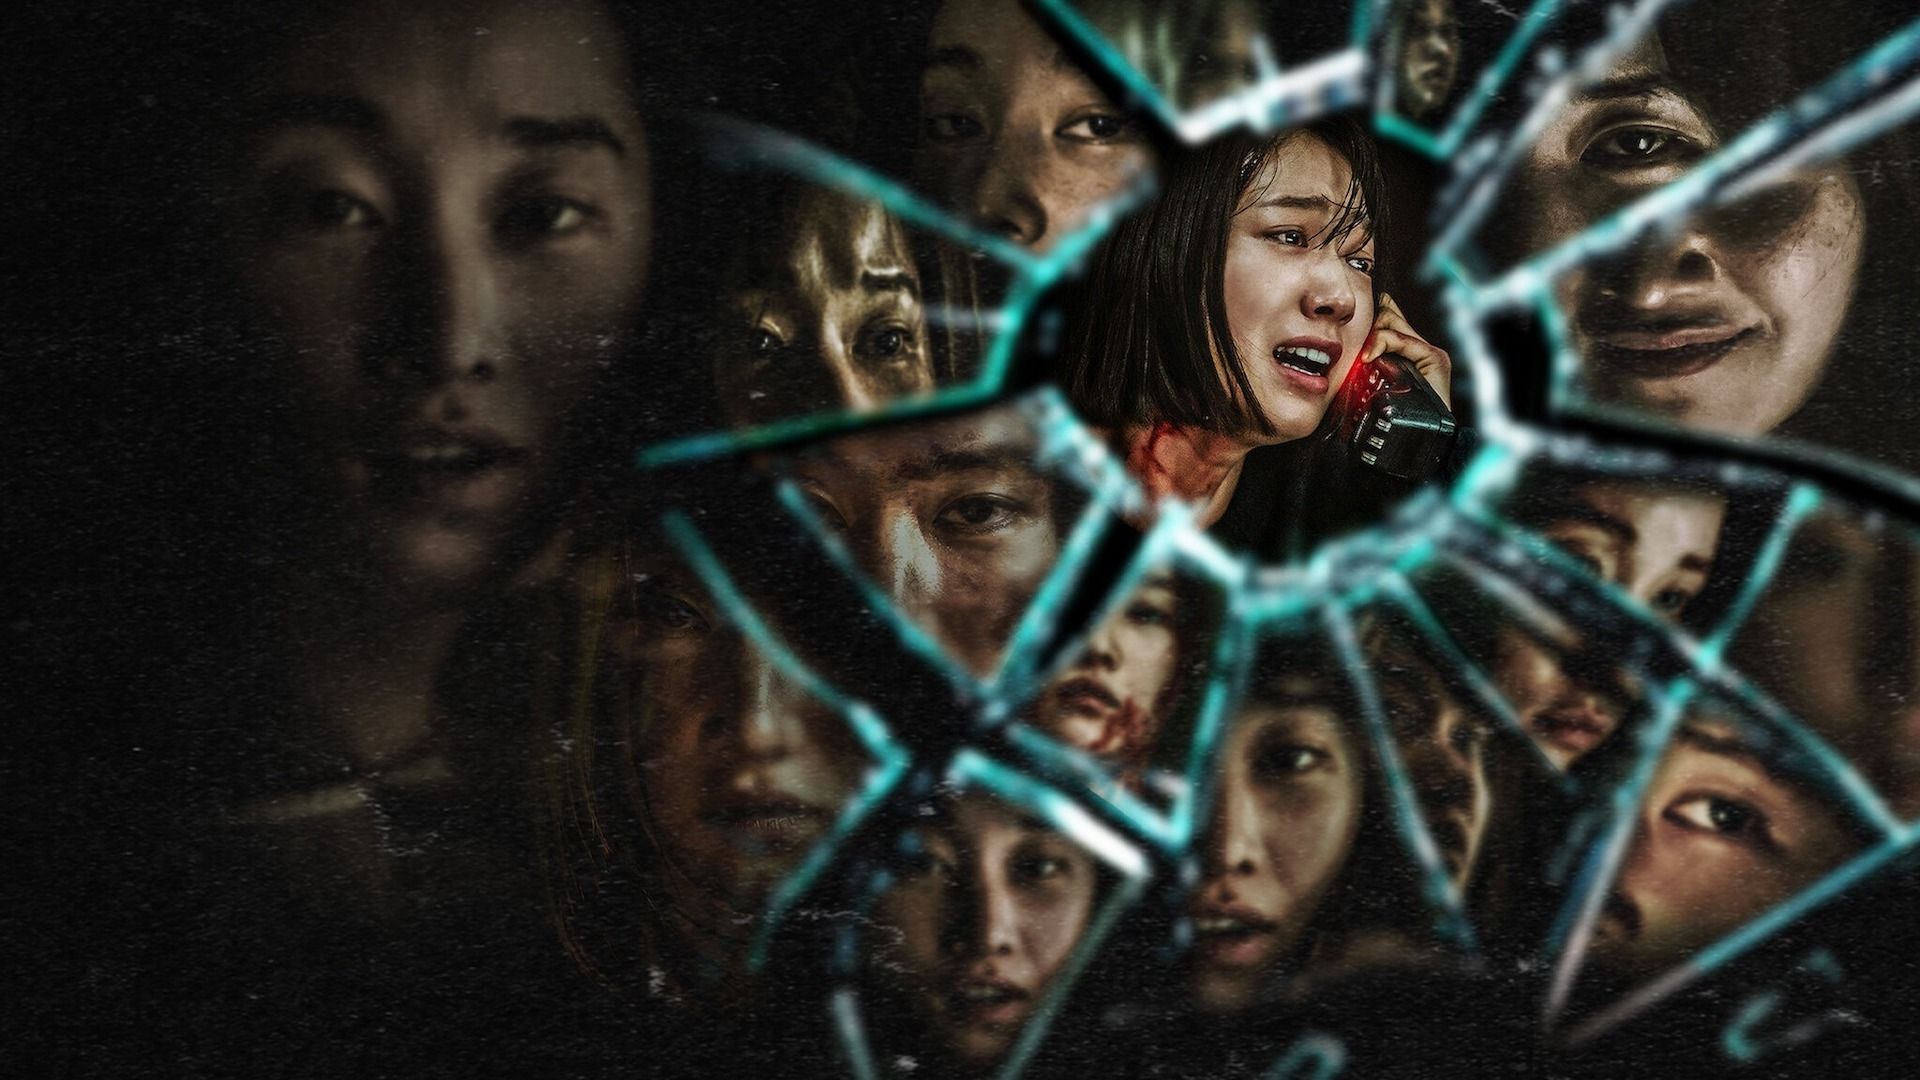 12 Korean zombie shows that will keep you on the edge of your seat - Her  World Singapore